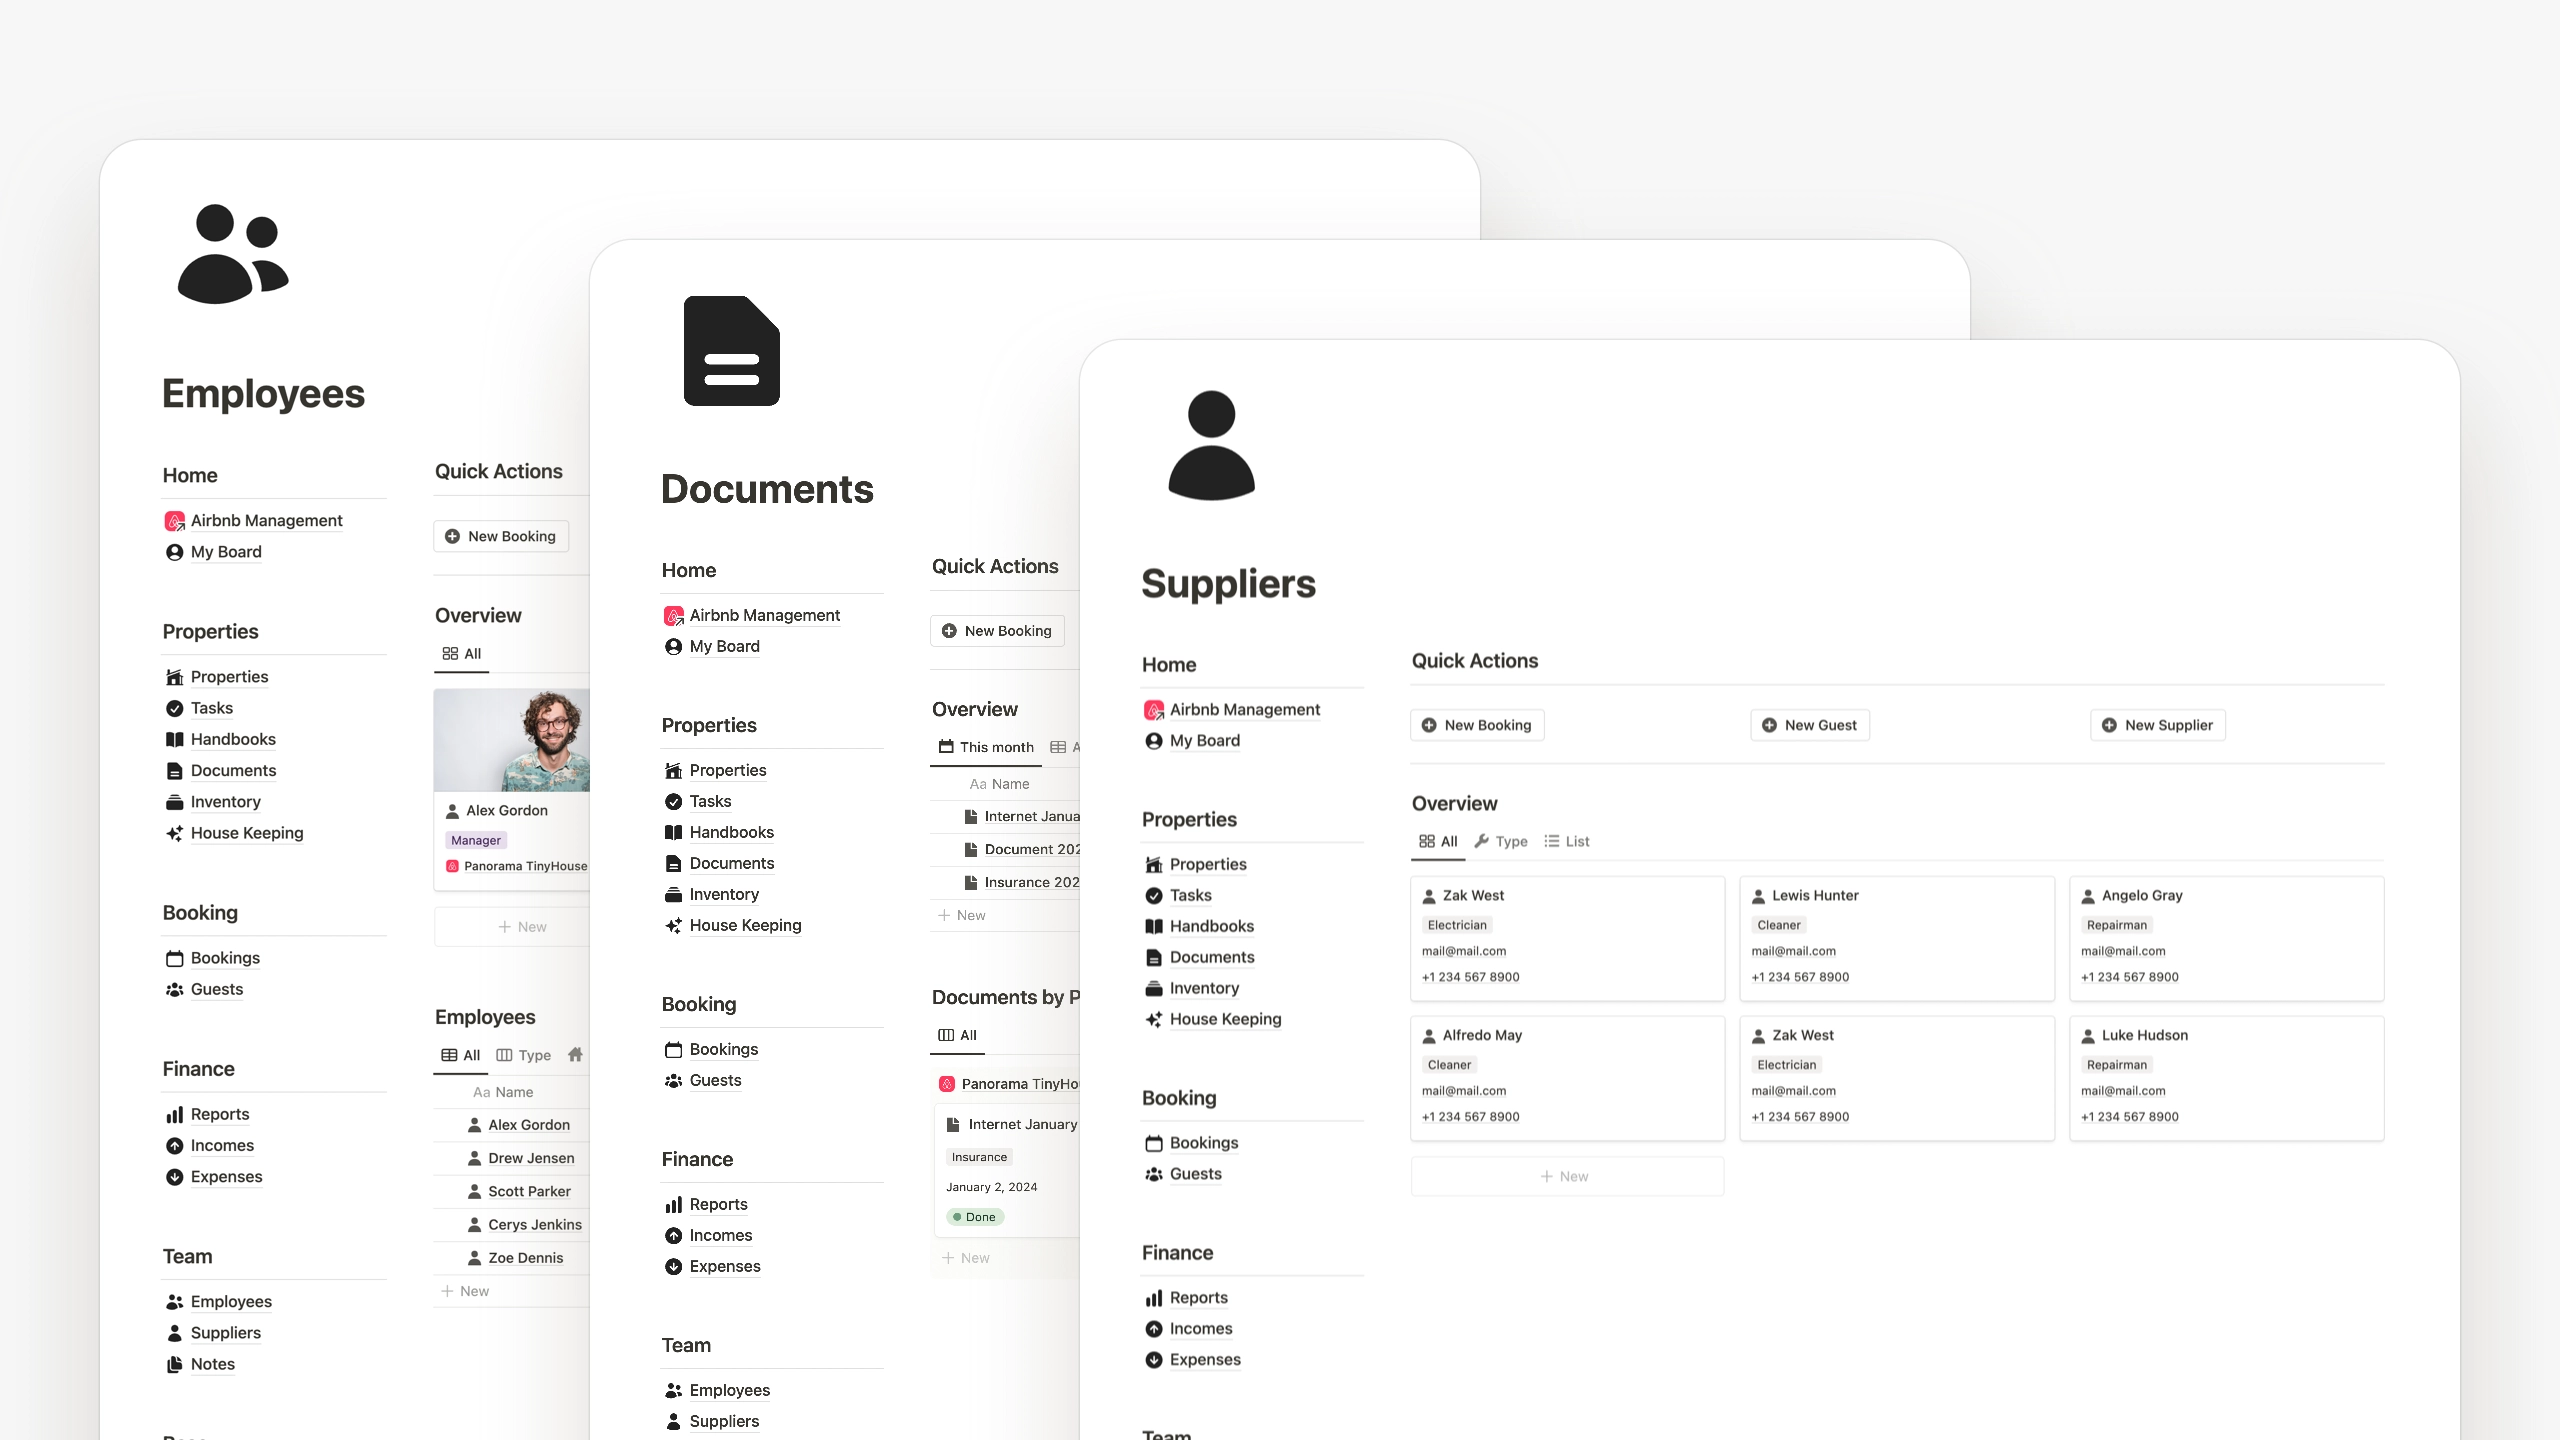 Notion Airbnb Management Template